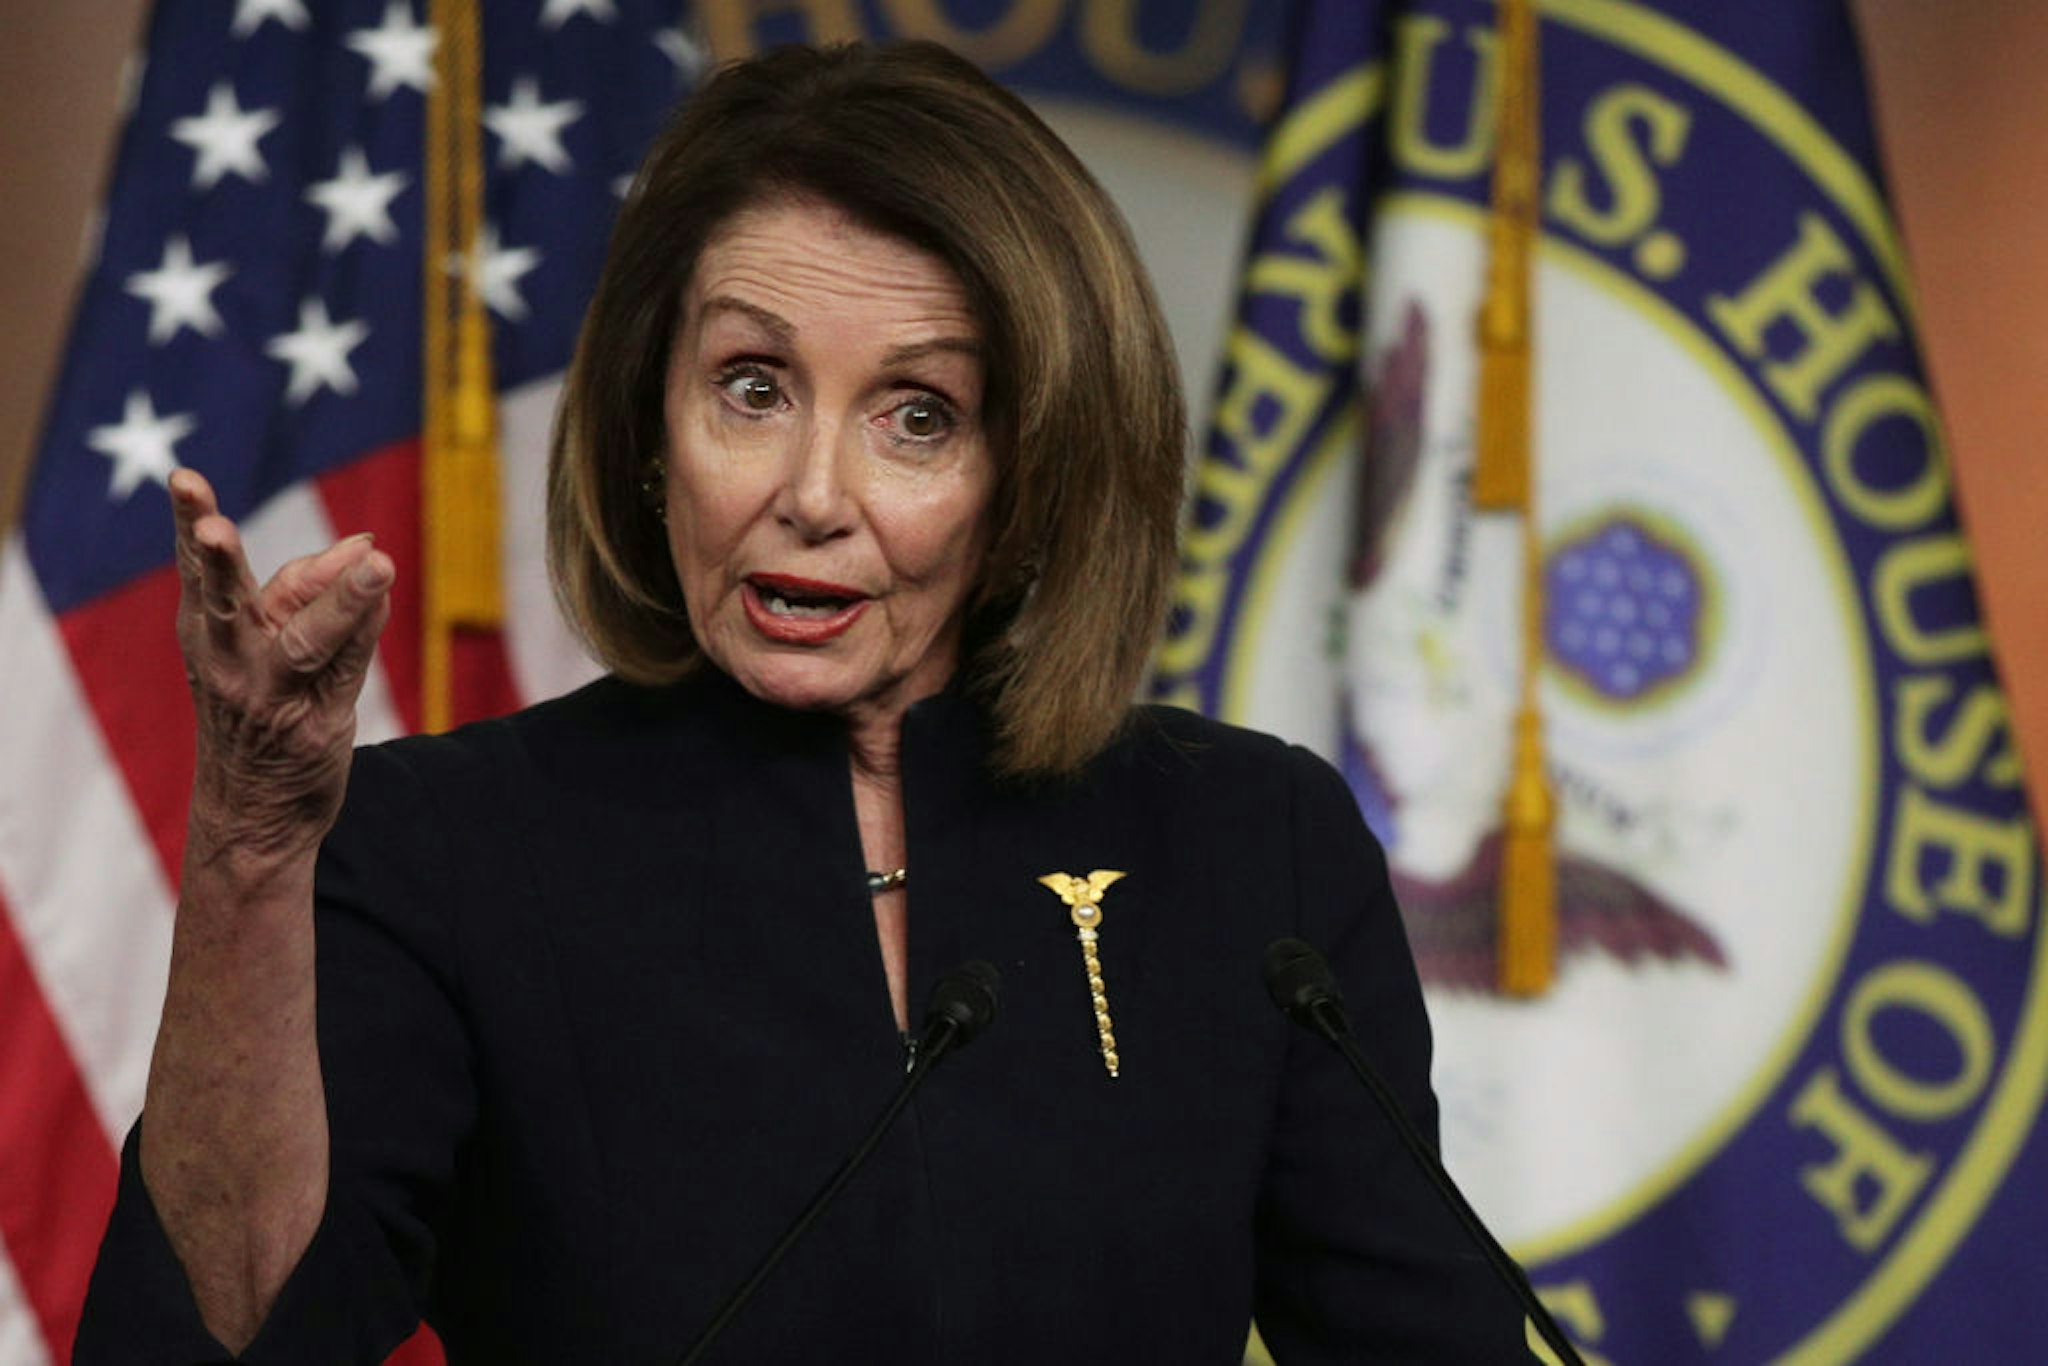 WASHINGTON, DC - FEBRUARY 14: U.S. Speaker of the House Rep. Nancy Pelosi (D-CA) speaks during a weekly news conference at the U.S. Capitol February 14, 2019 in Washington, DC. Speaker Pelosi spoke on various topics, including the Government Funding and Border Security legislation. (Photo by Alex Wong/Getty Images)